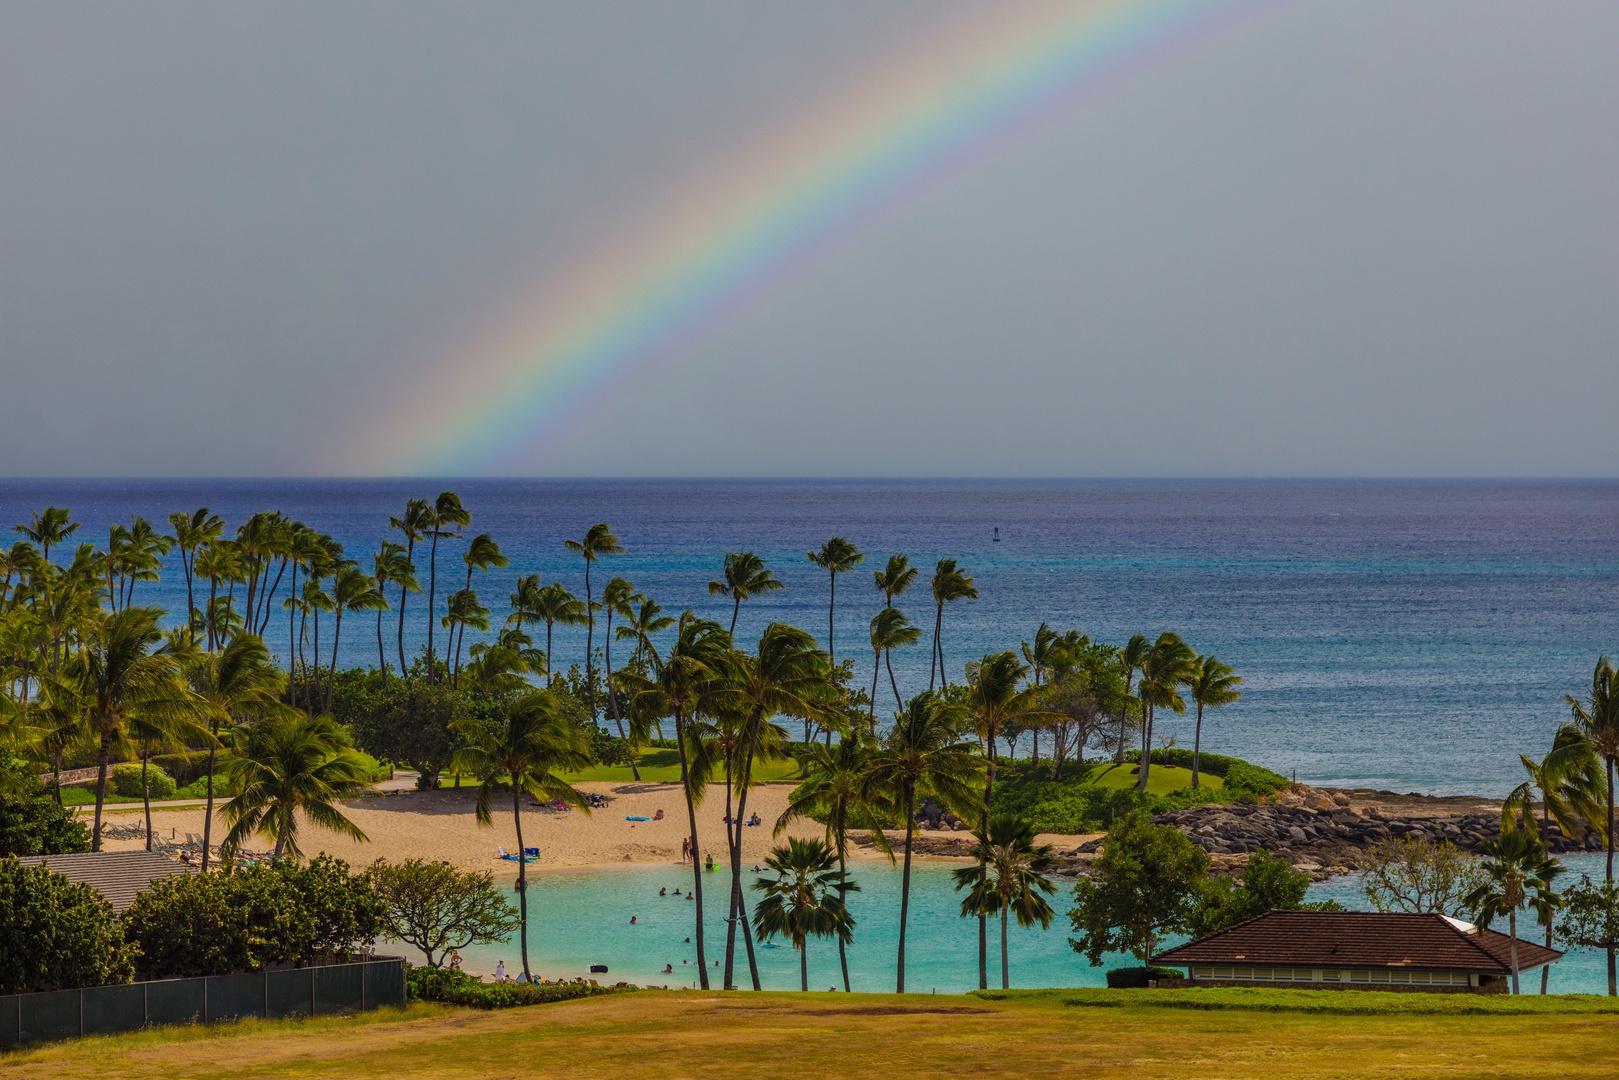 Kapolei Vacation Rentals, Ko Olina Beach Villas O724 - Rainbow arching over a tropical beachfront, a blend of nature's magic and tranquility.